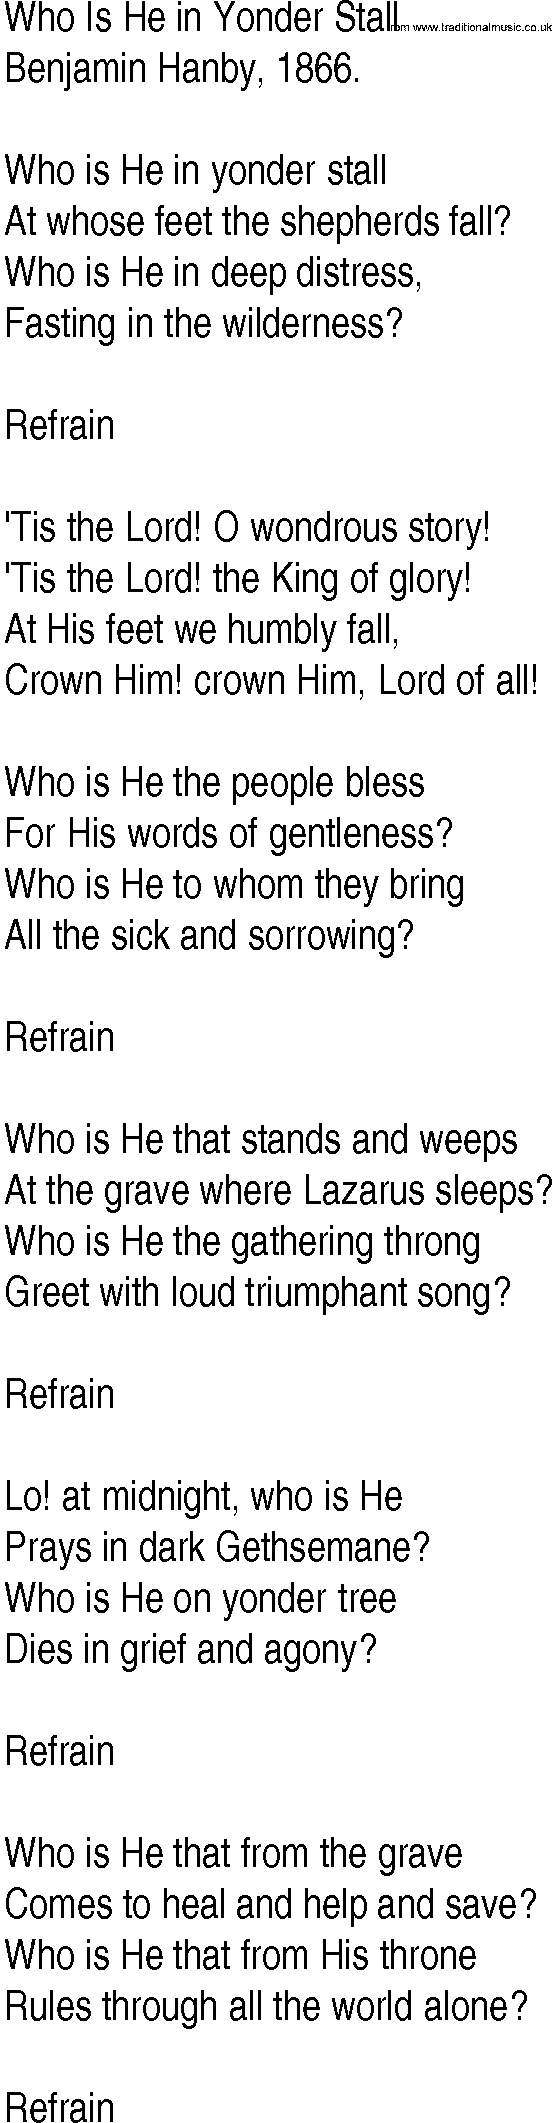 Hymn and Gospel Song: Who Is He in Yonder Stall by Benjamin Hanby lyrics